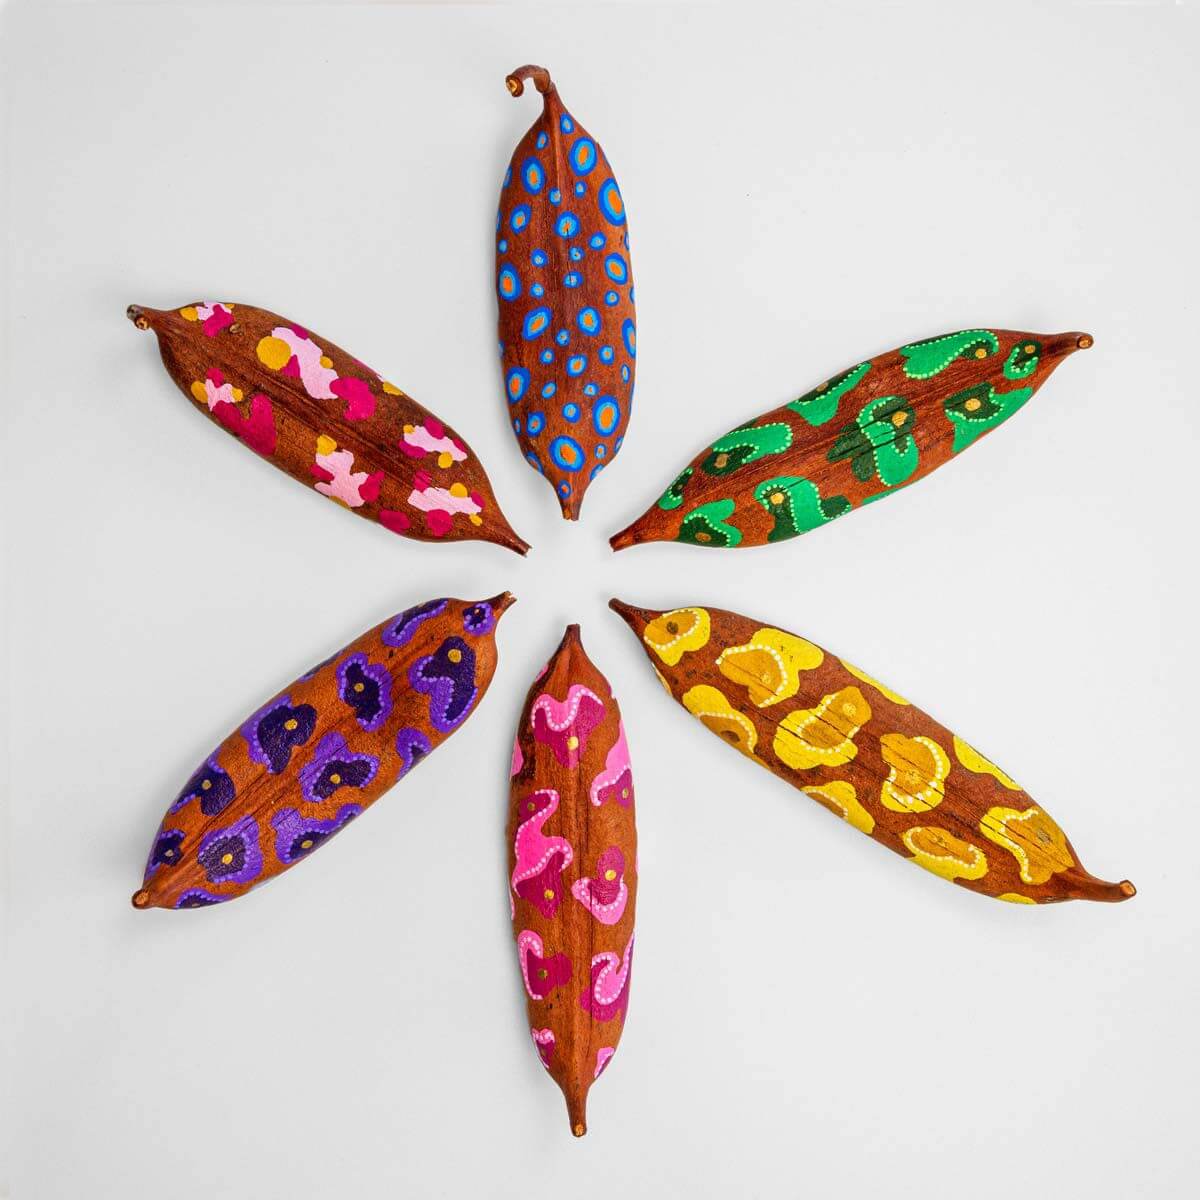 5. Six painted leaves in various bright colours and patterns laid out onto a white table.